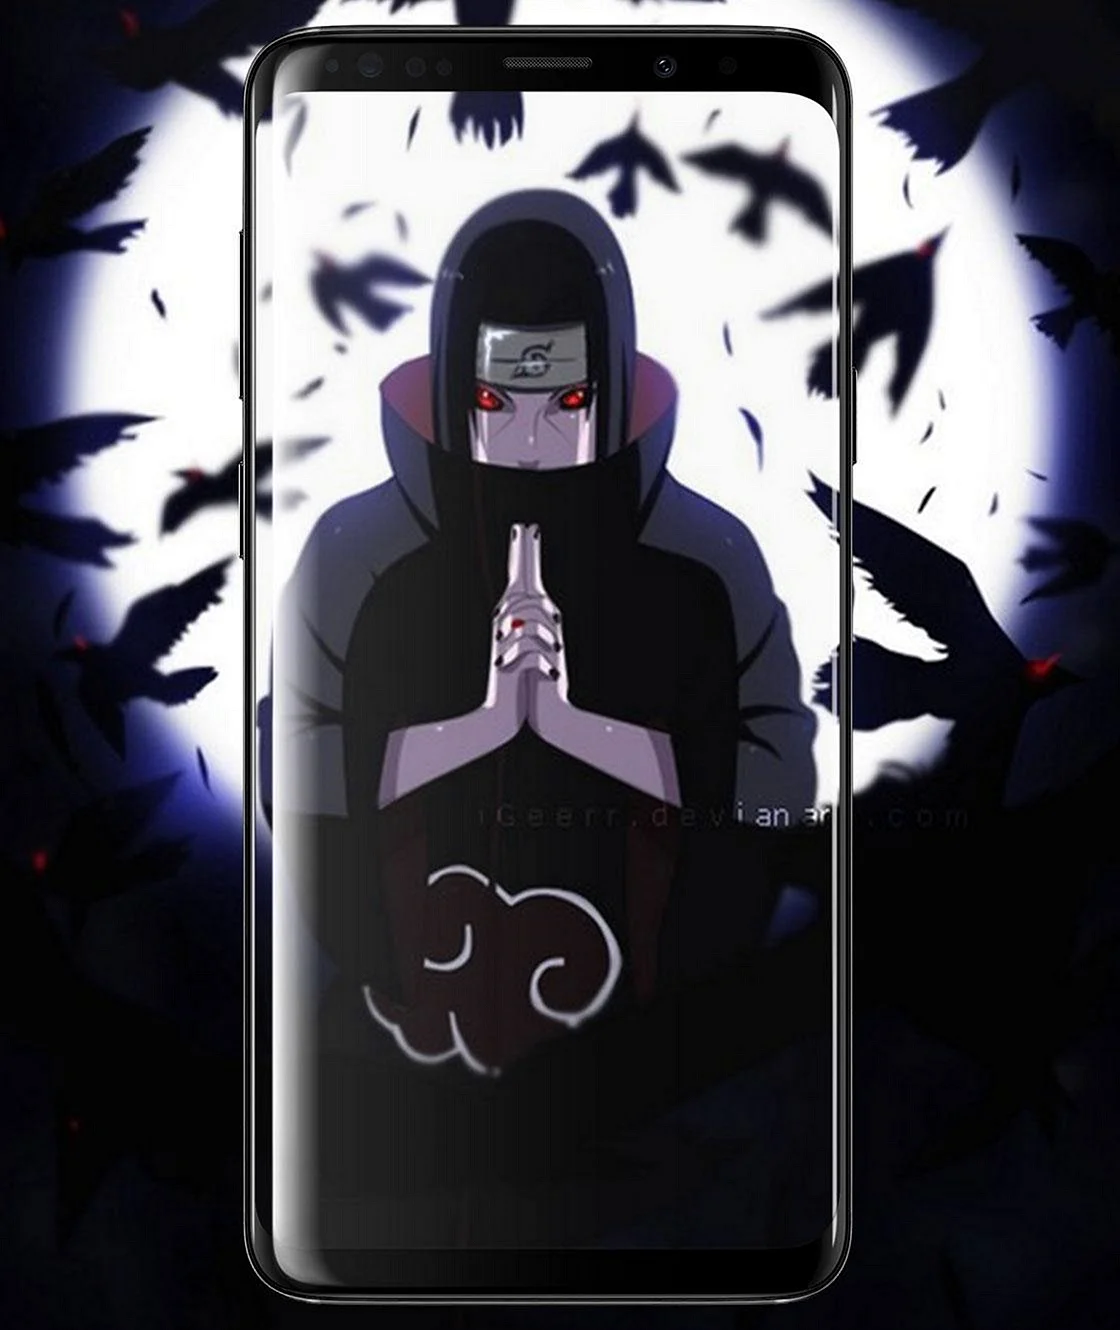 Android Uchiha Itachi Wallpaper For iPhone